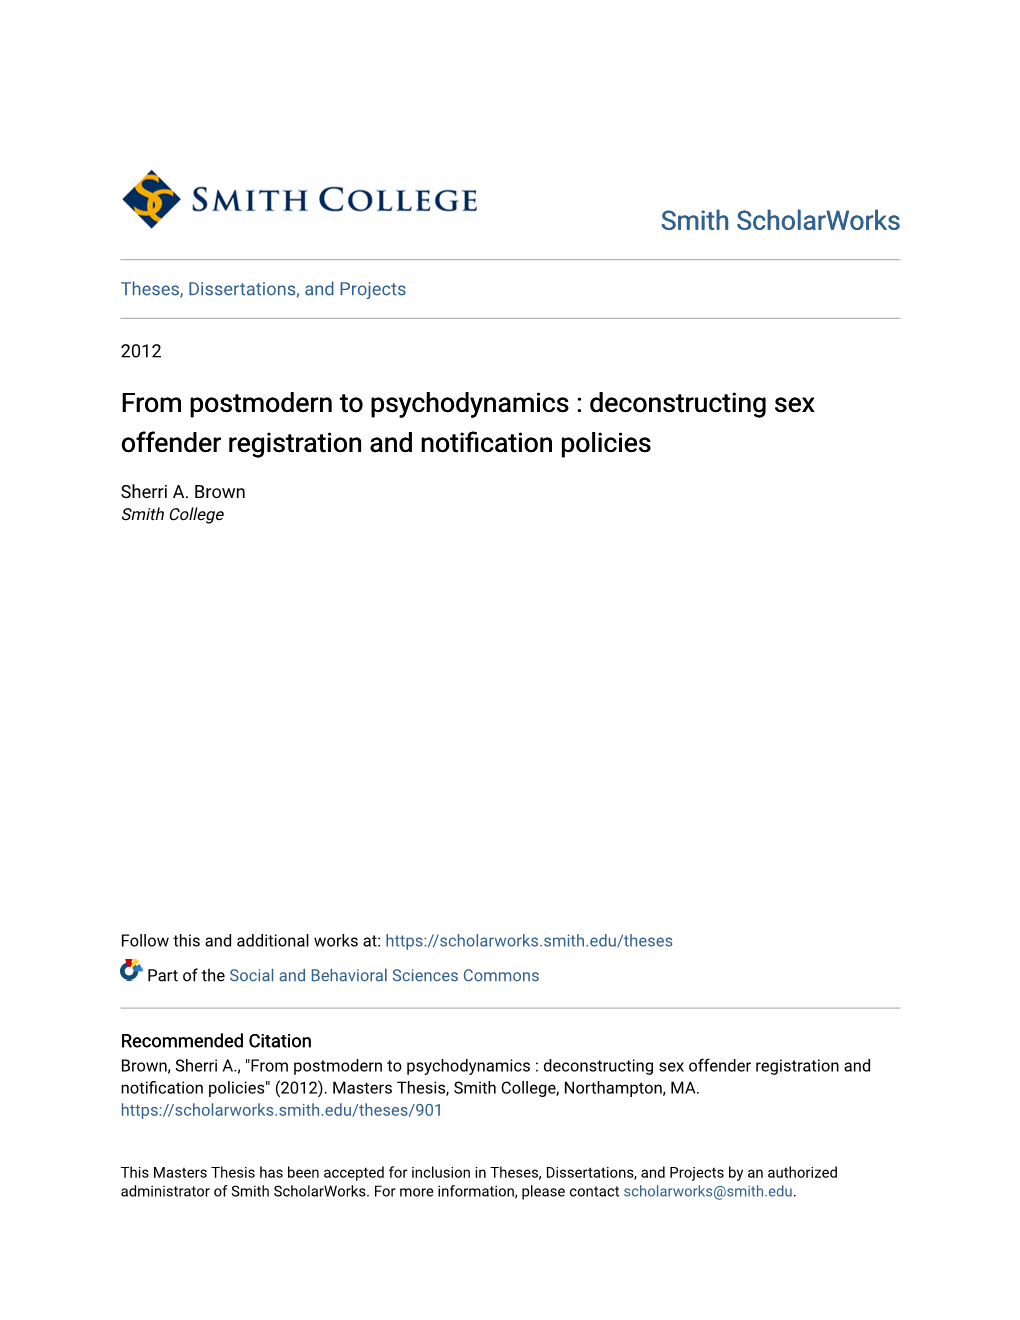 From Postmodern to Psychodynamics : Deconstructing Sex Offender Registration and Notification Policies